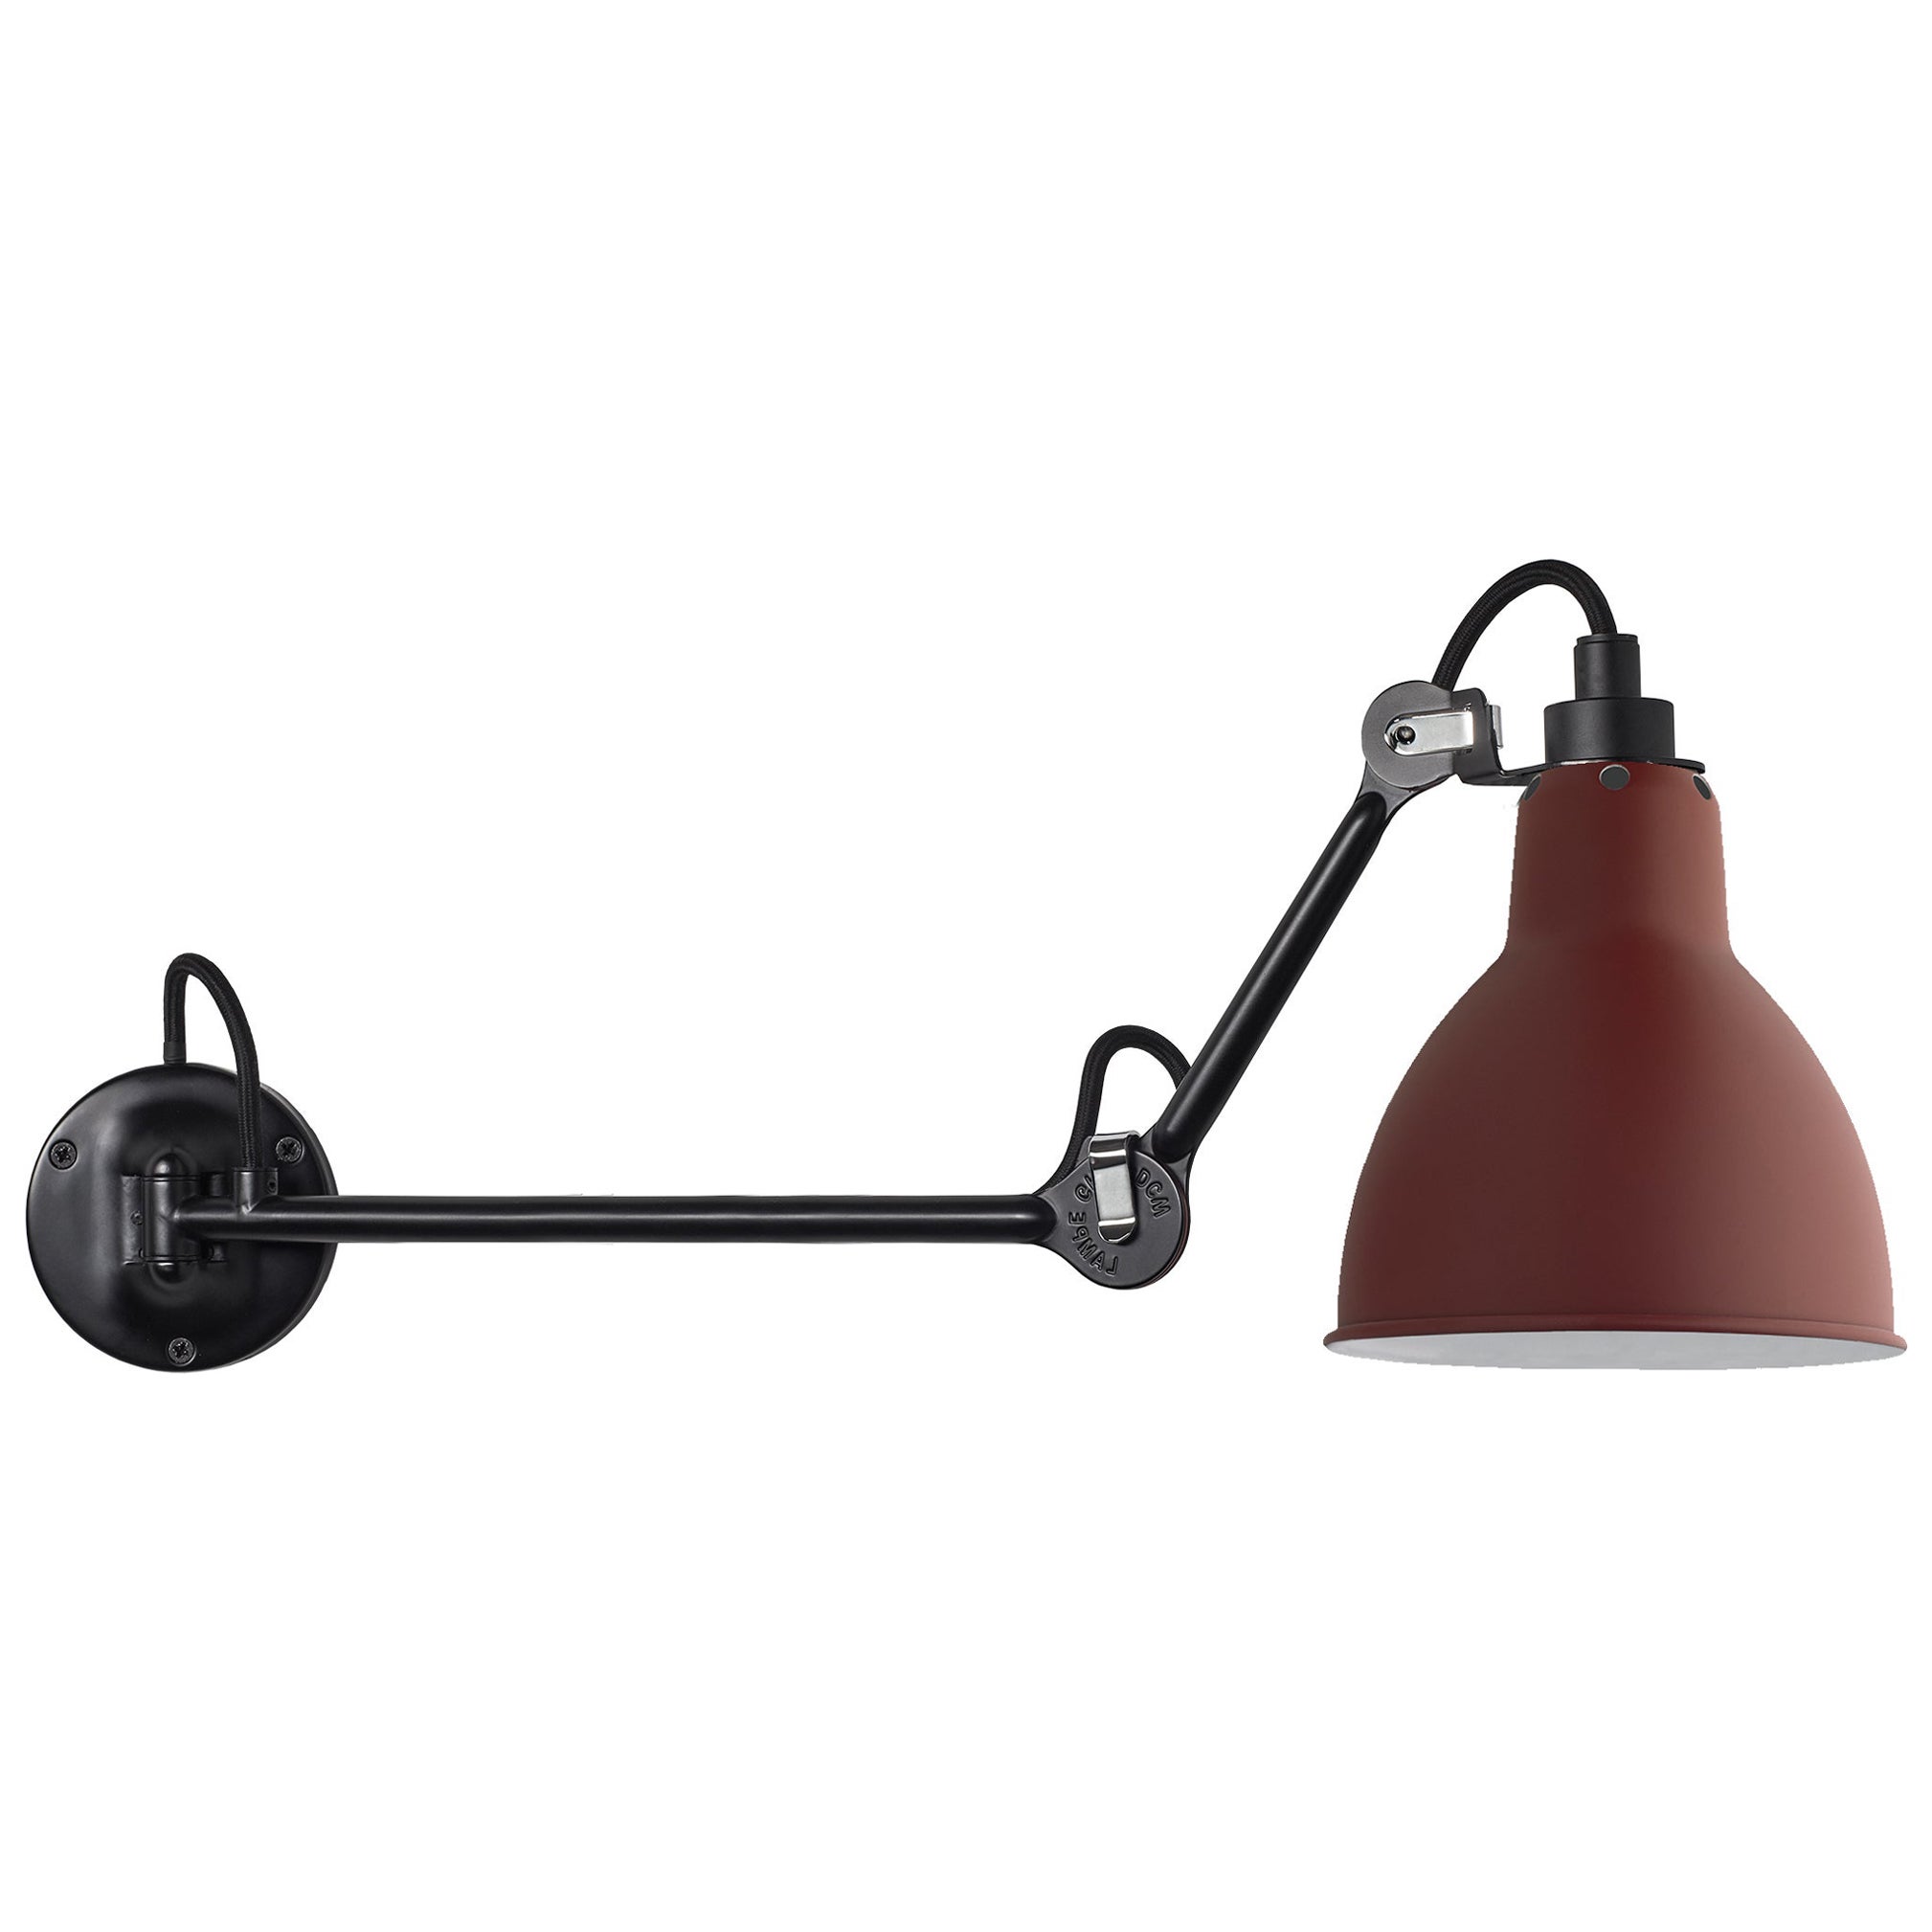 DCW Editions La Lampe Gras N°204 L40 Wall Lamp in Black Steel Arm and Red Shade